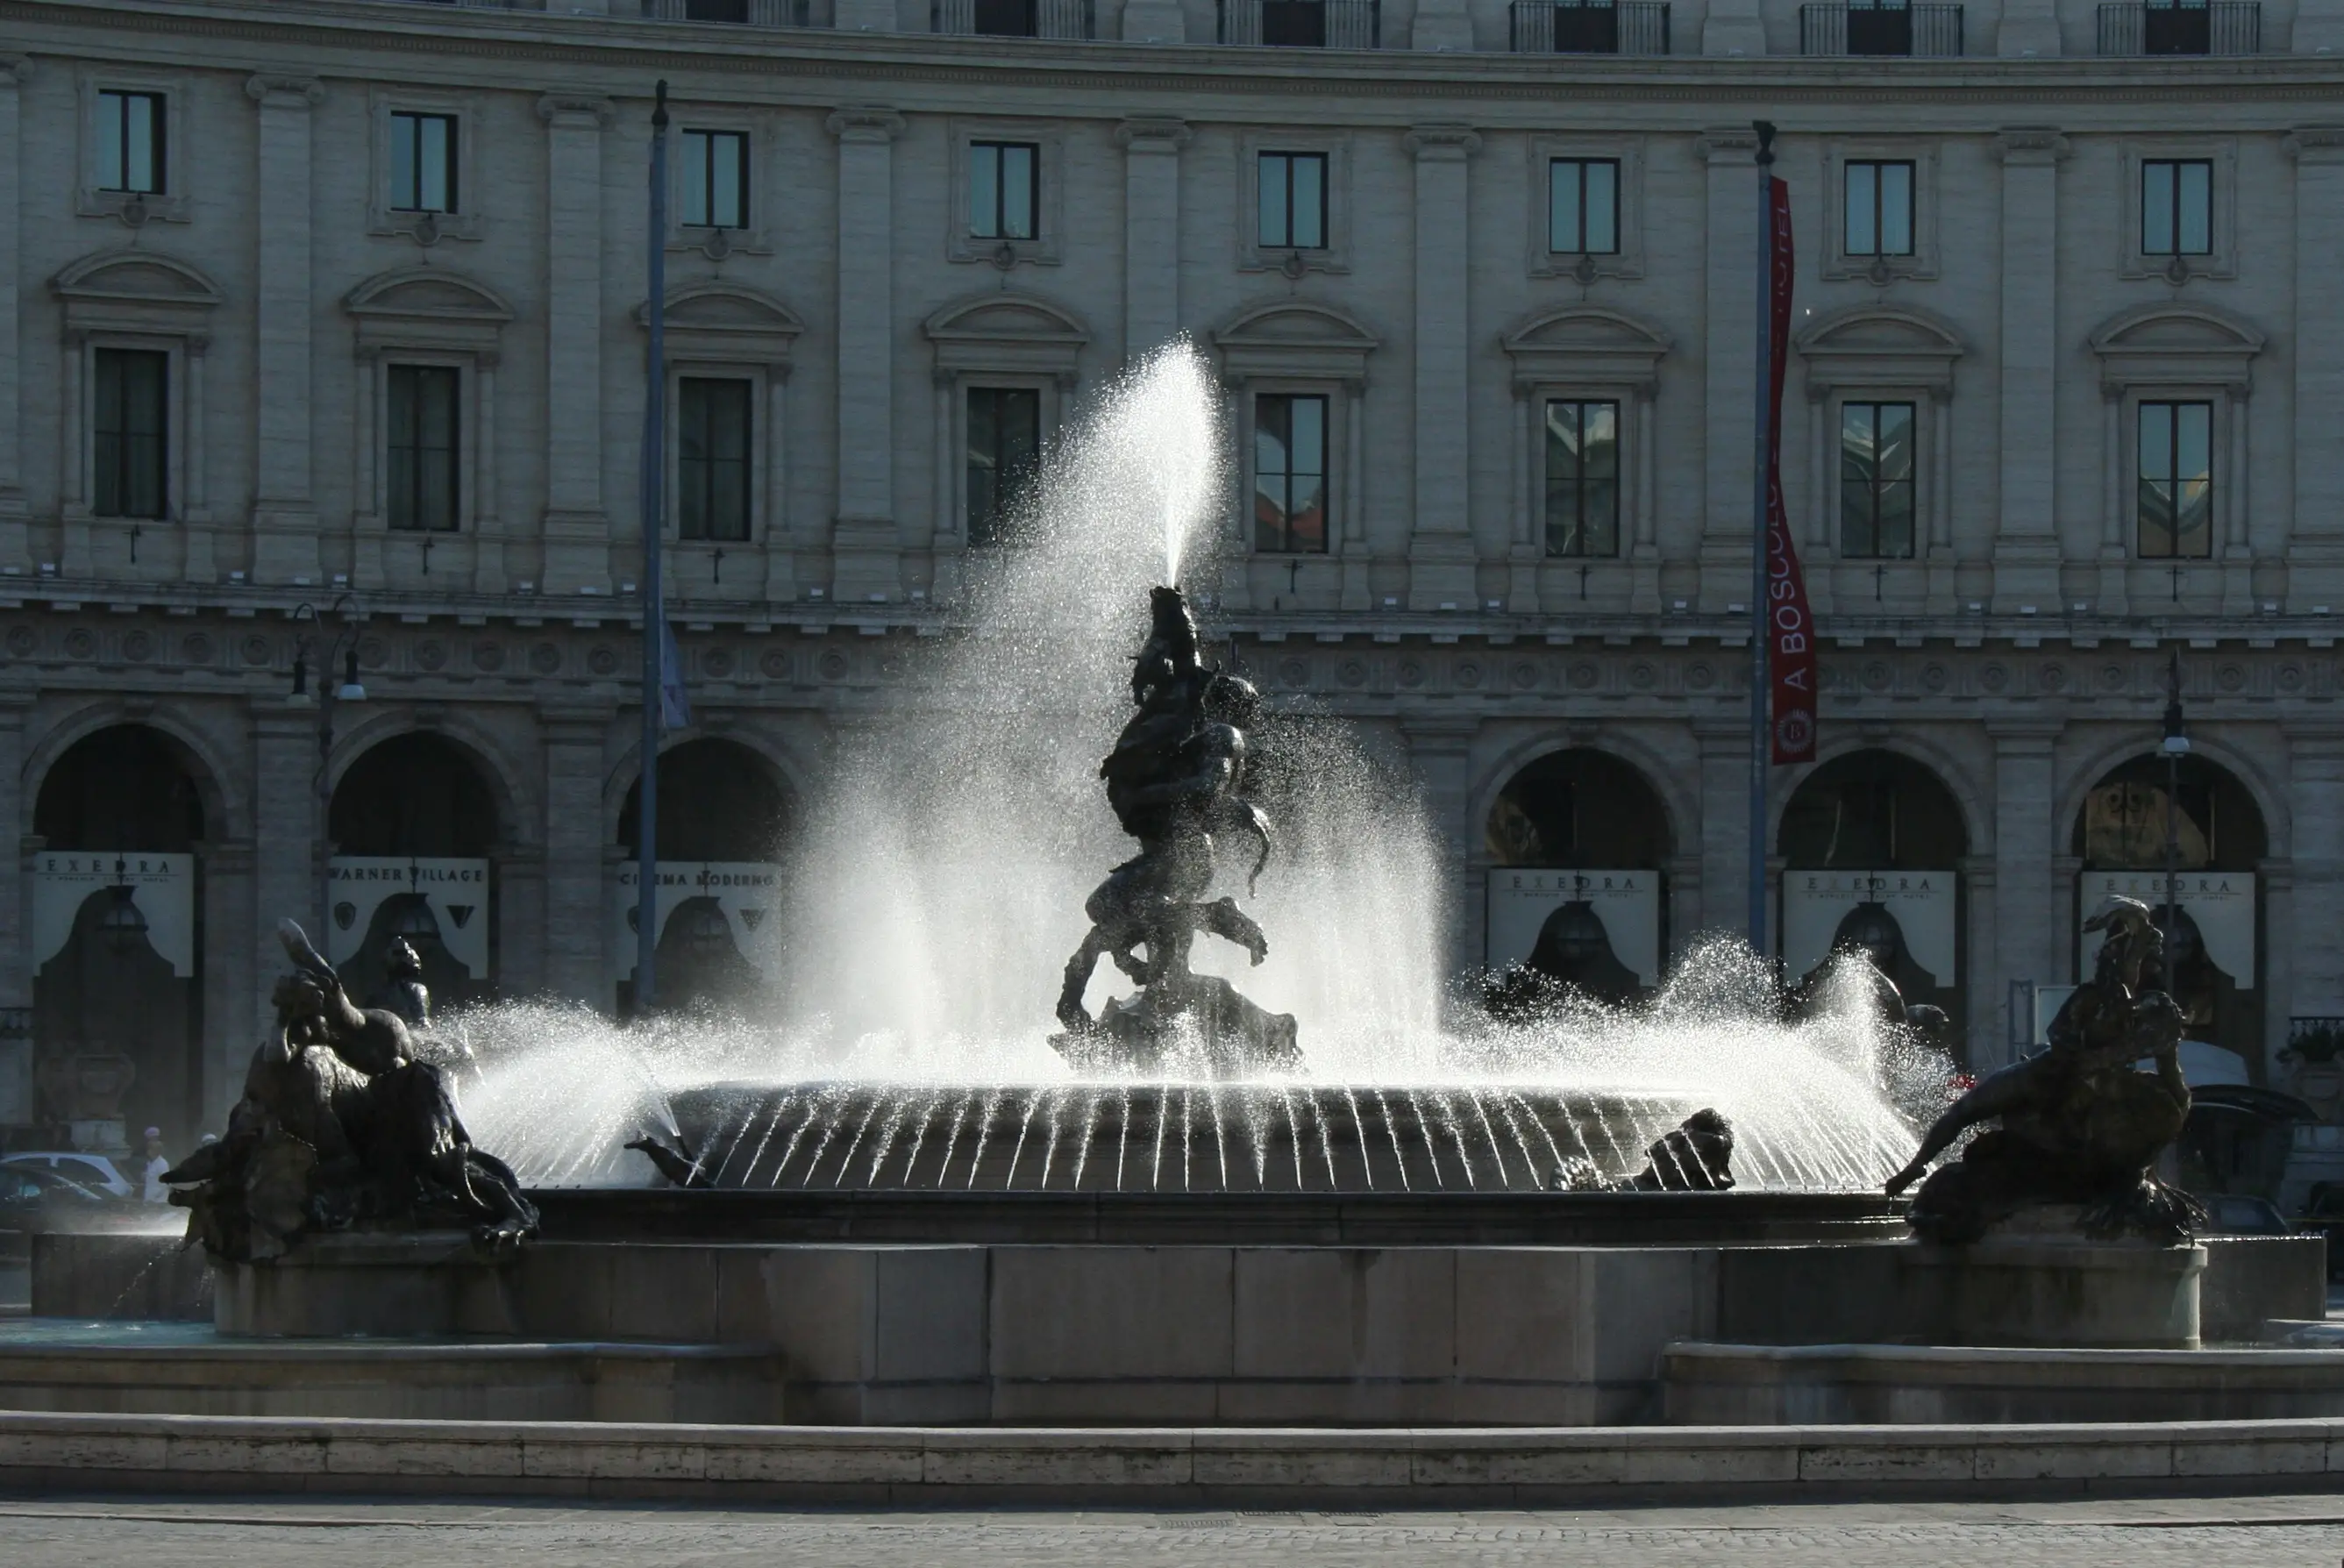 The Fountain of the Naiads